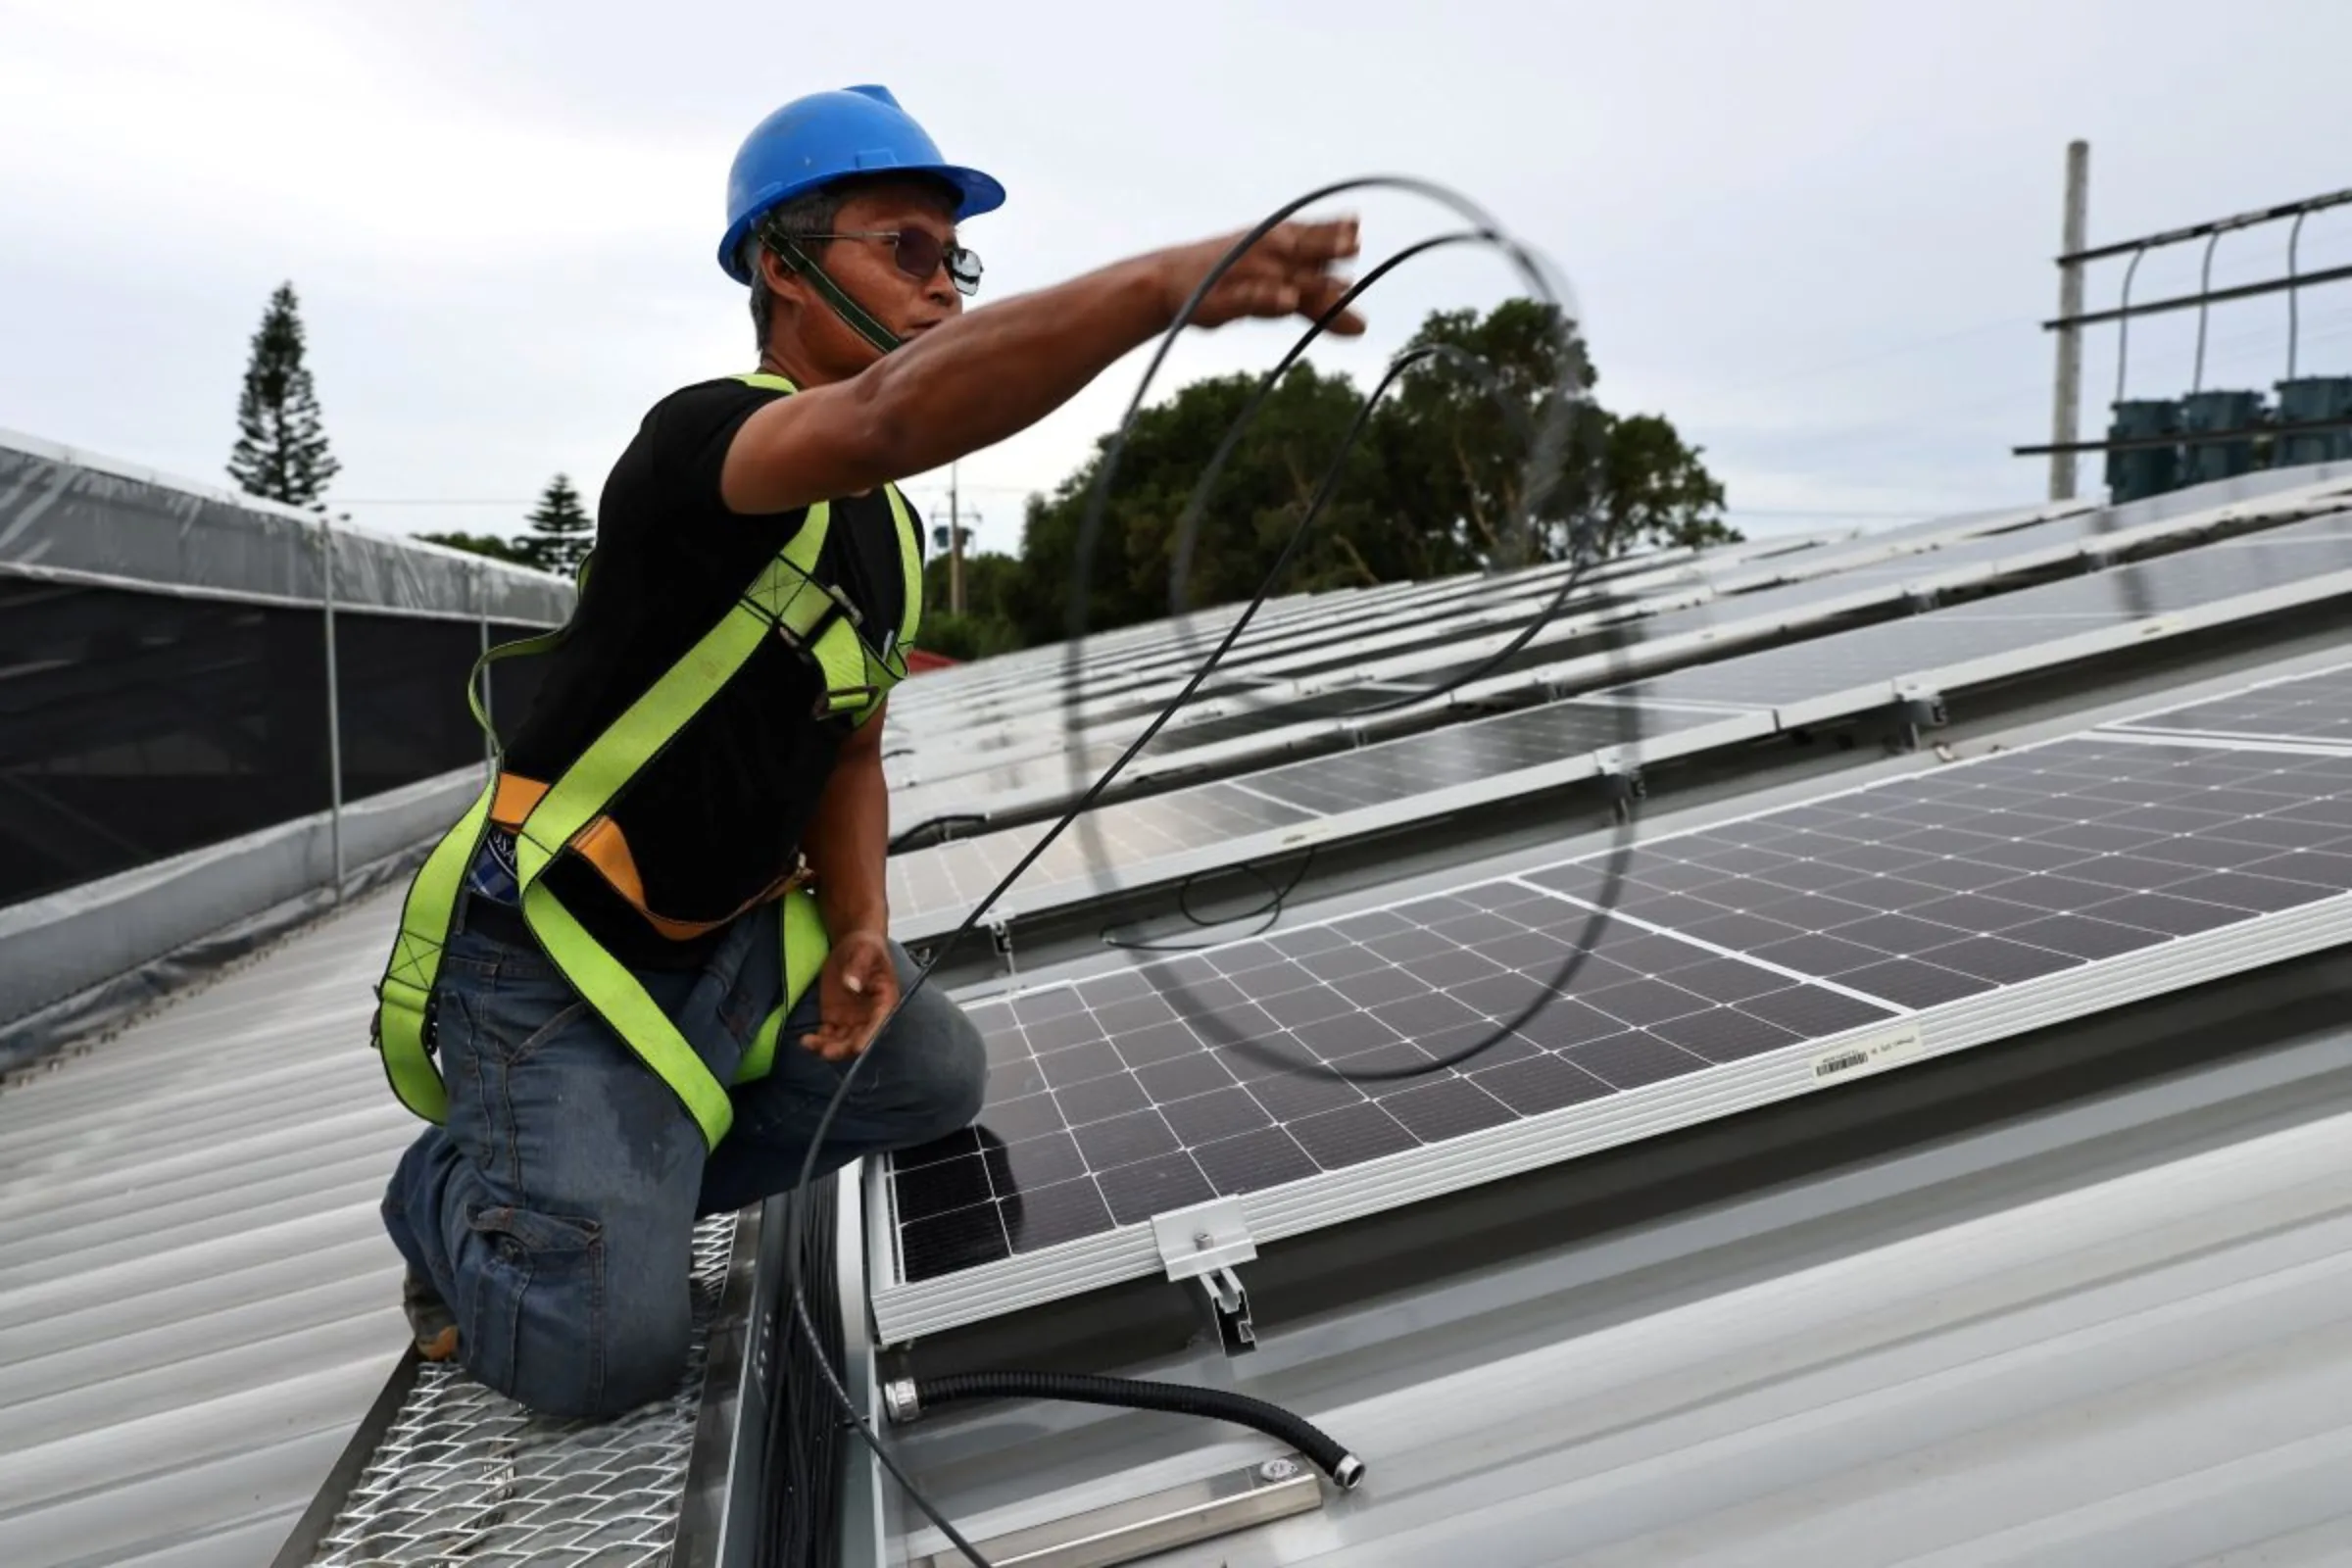 A worker organizes cables for the solar panels on top of the vanilla farm in Taoyuan, Taiwan, June 17, 2022